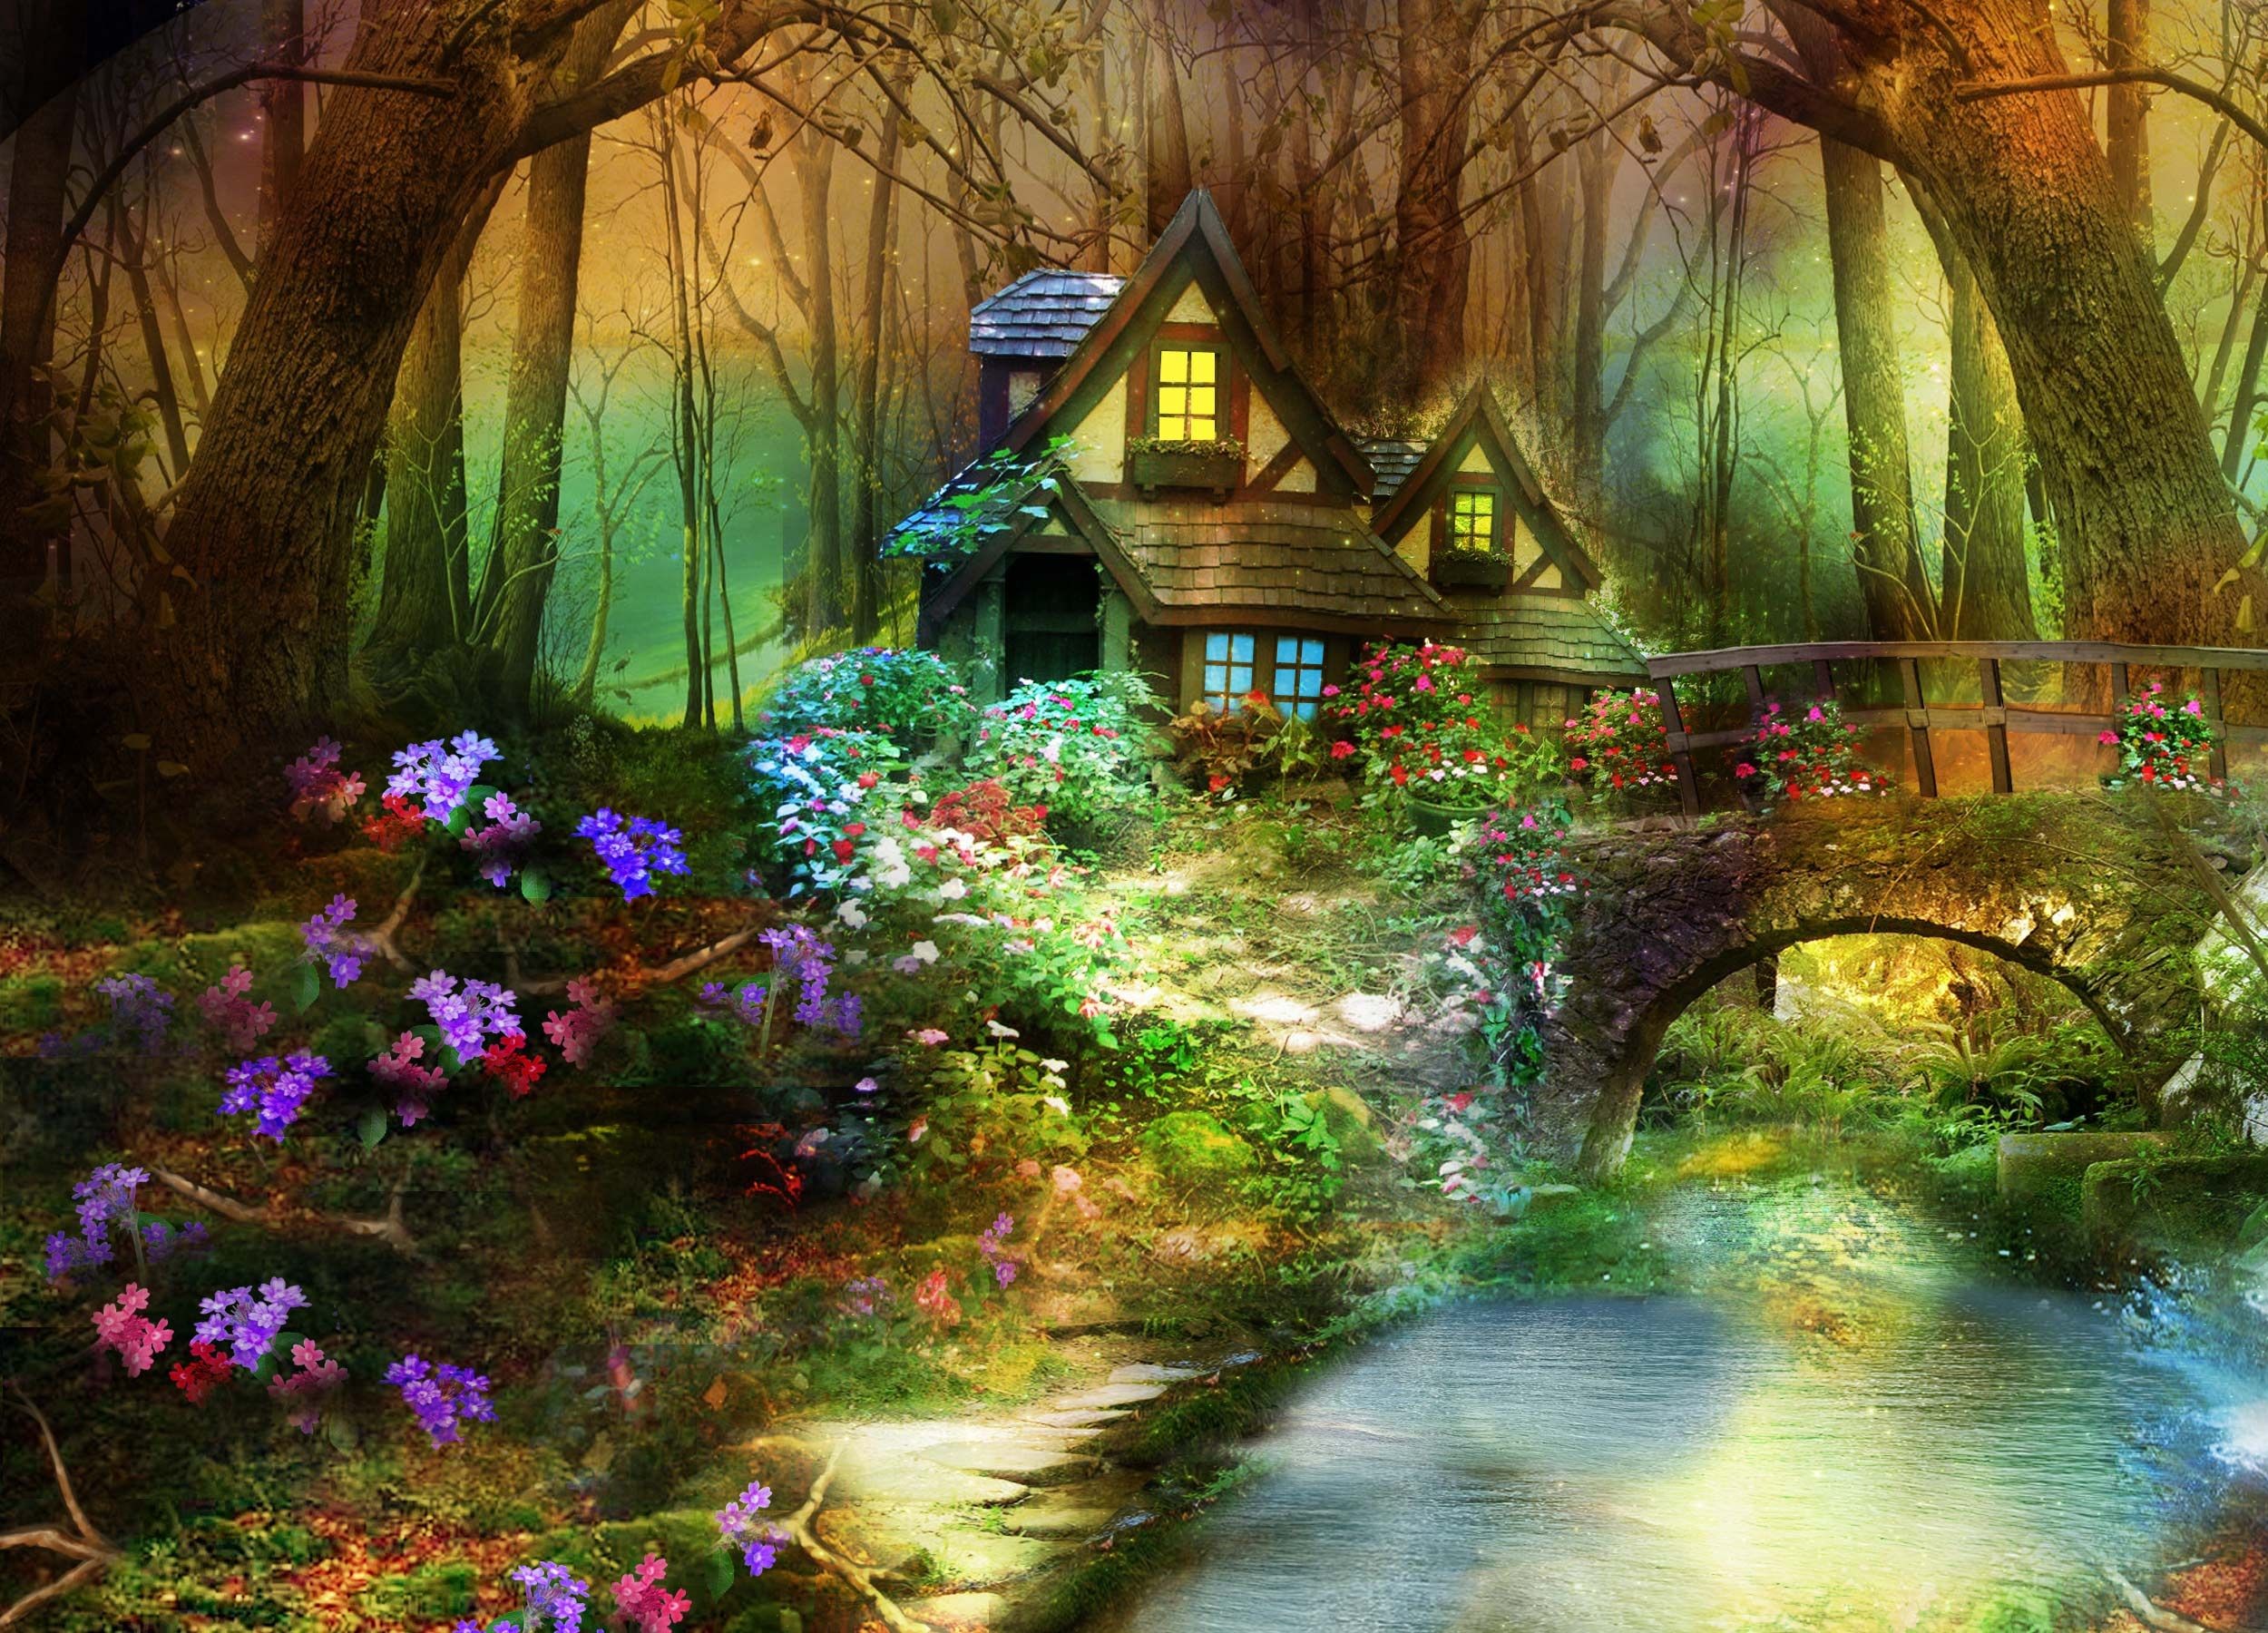 2500x1800 wallpaper fantasy nature forest - Google Search